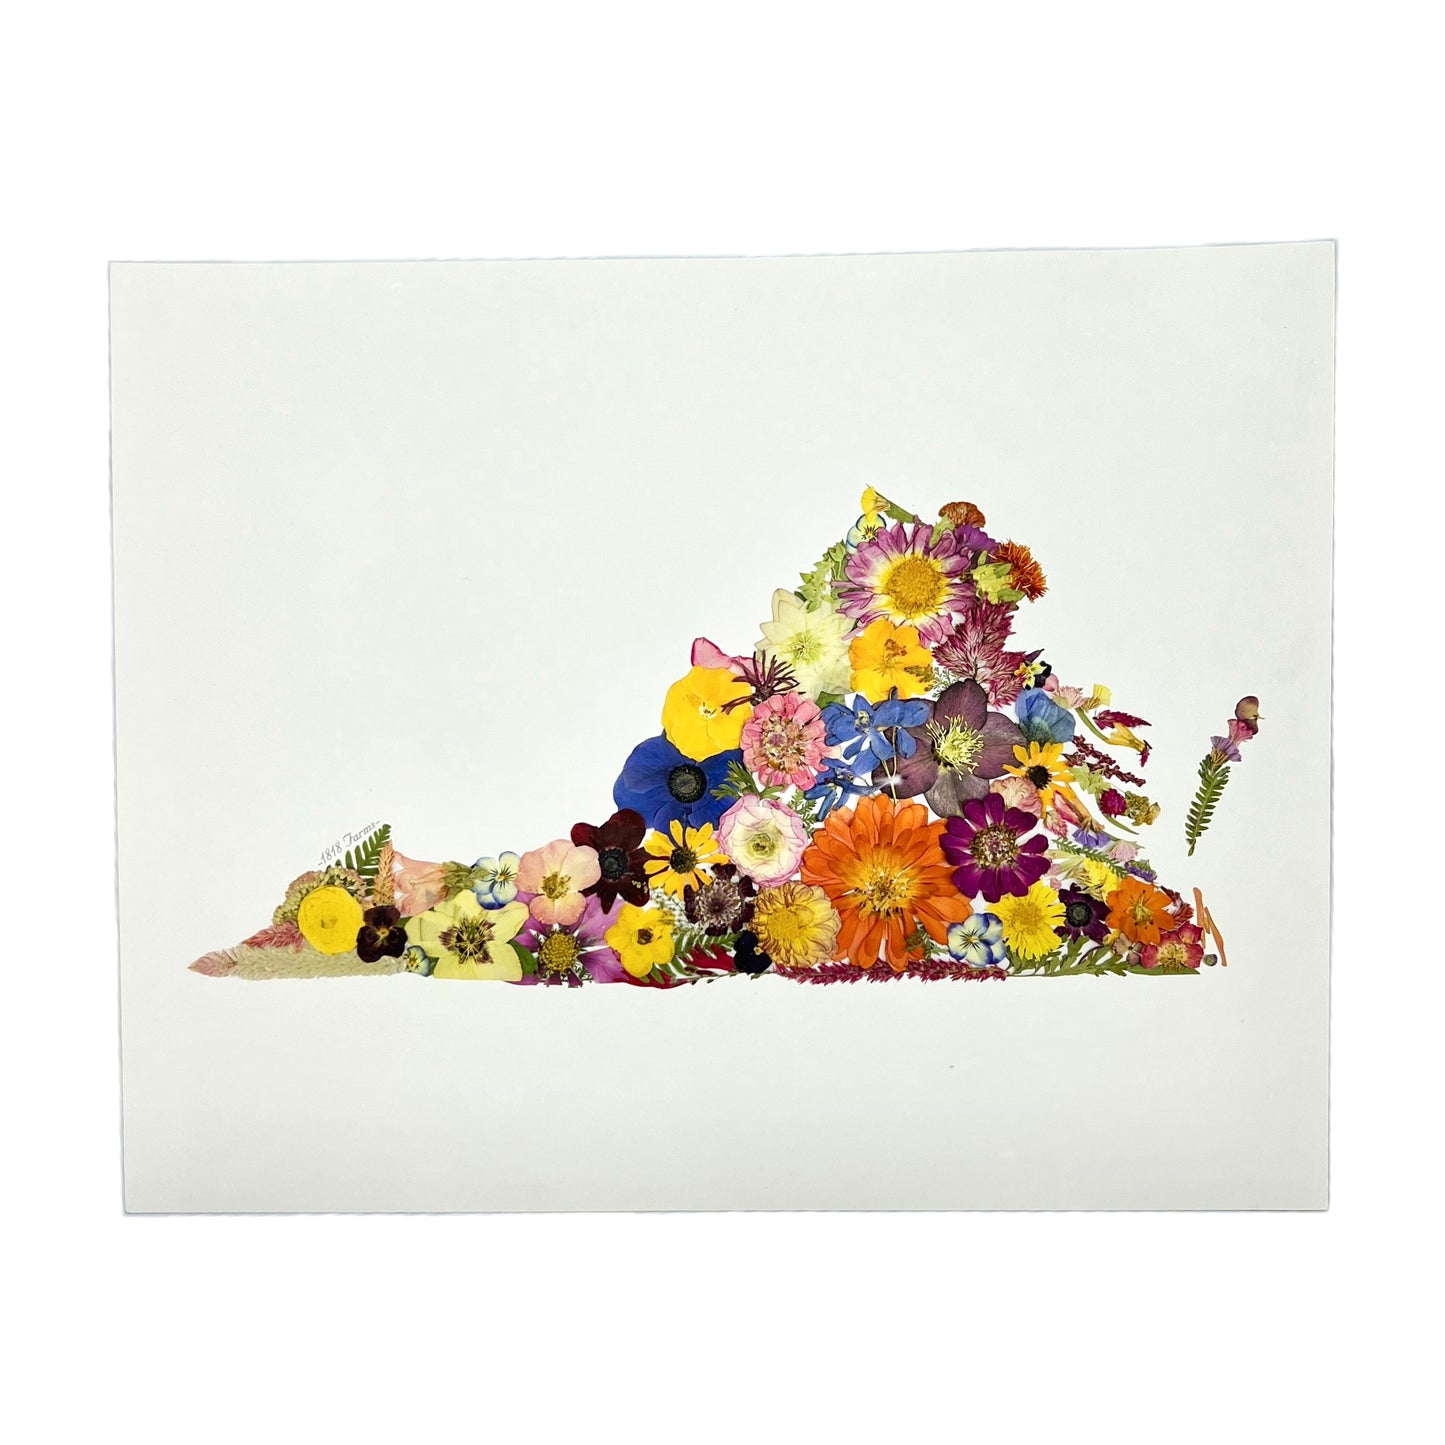 State Themed Giclée Print Featuring Dried, Pressed Flowers - "Where I Bloom" Collection